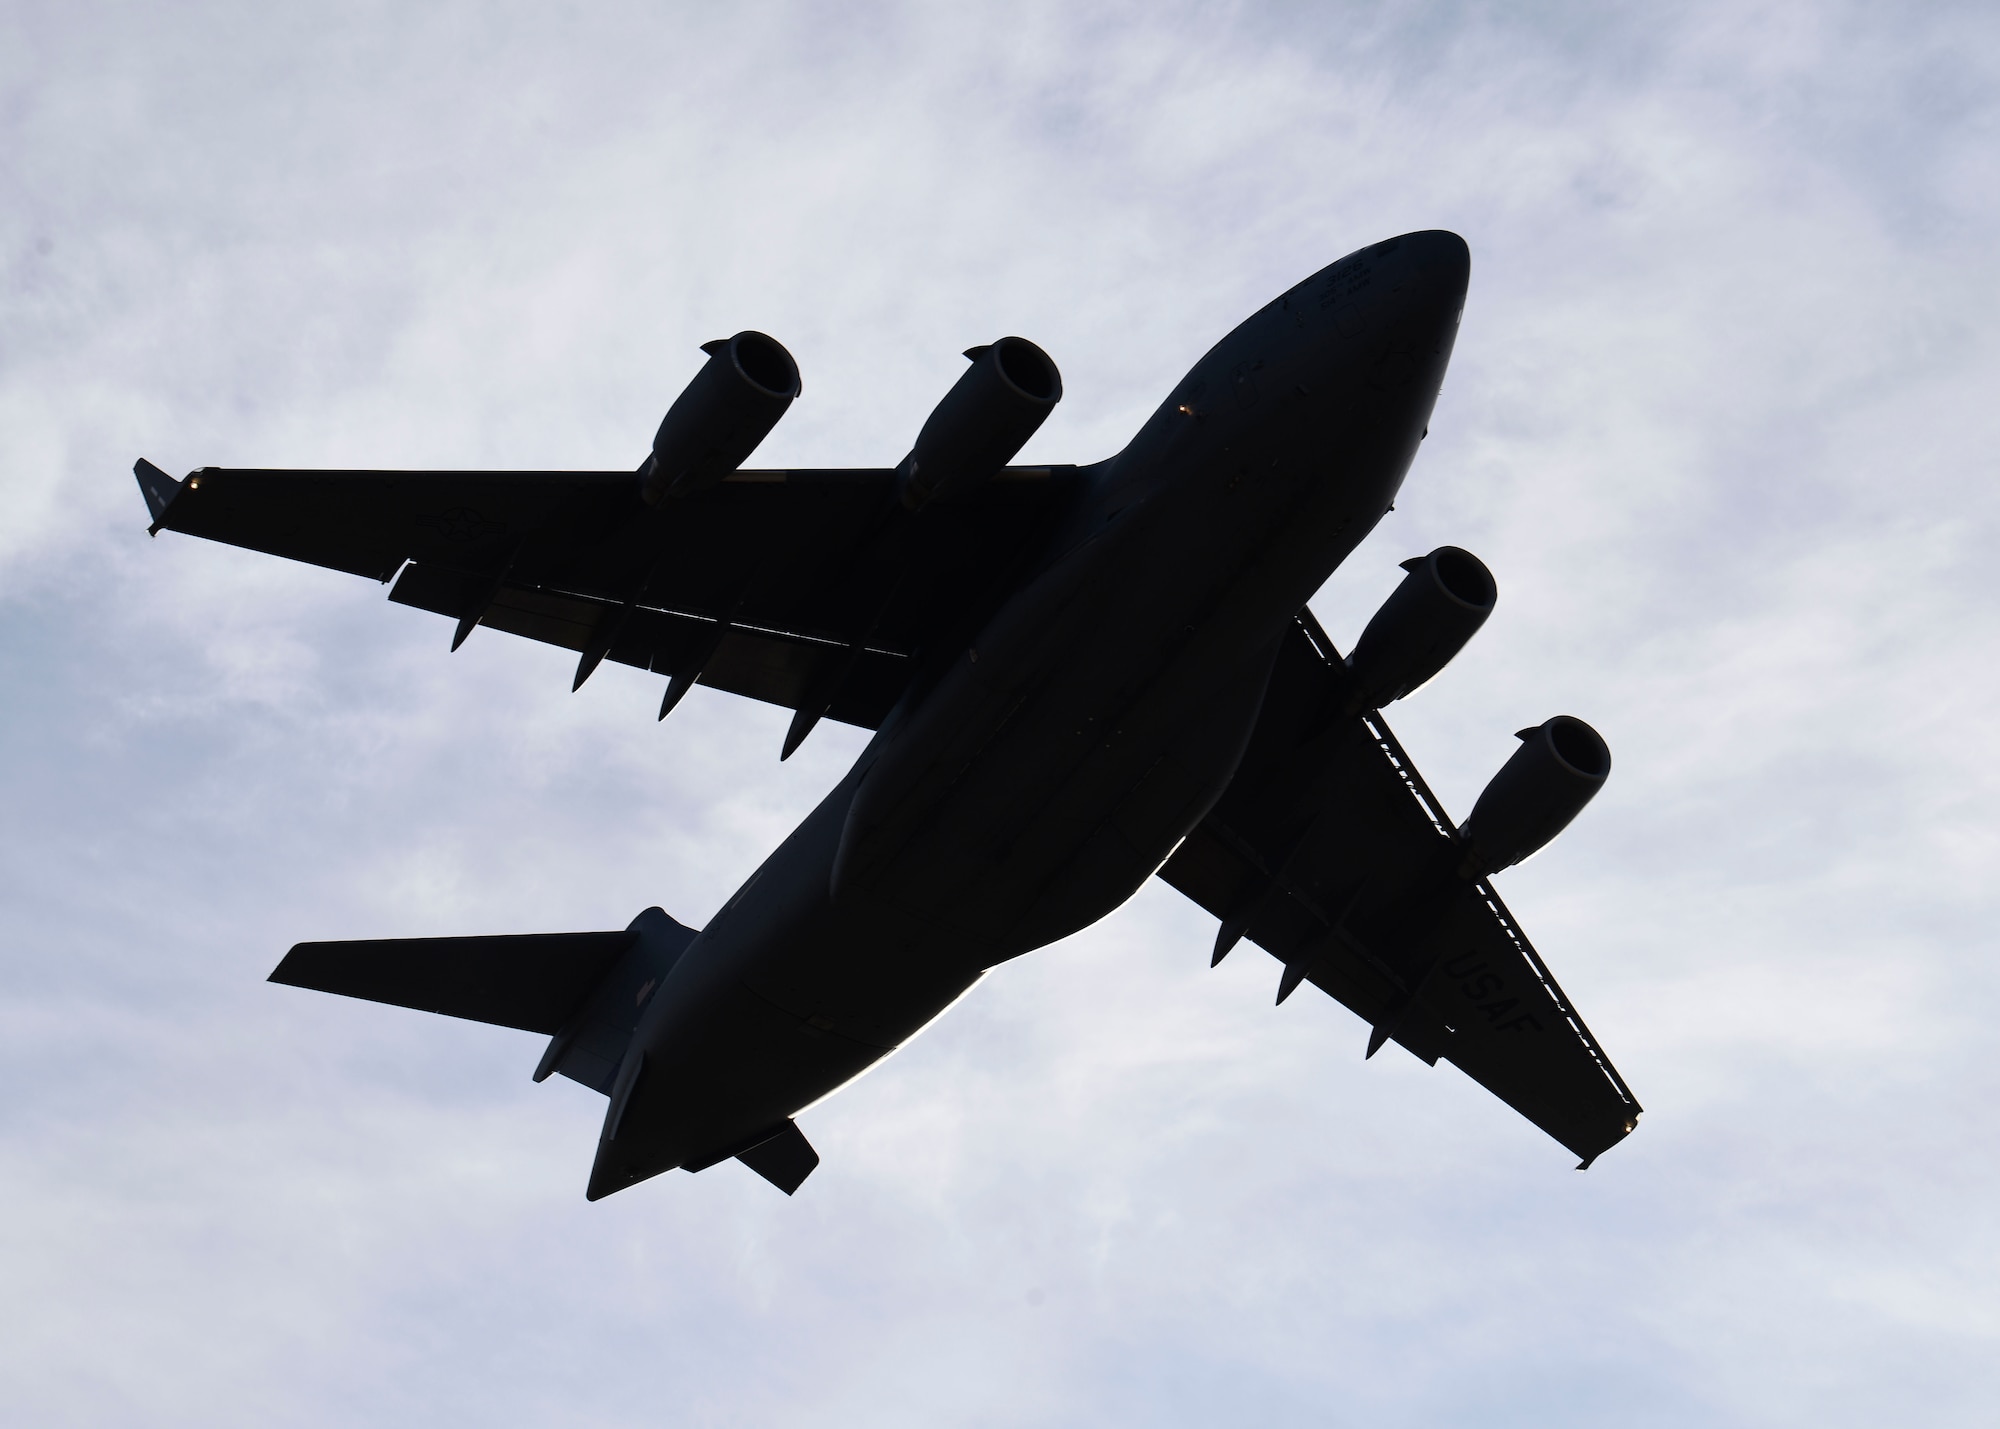 A U.S. Air Force C-17 Globemaster III from Joint Base McGuire-Dix-Lakehurst, New Jersey, takes off during exercise Mobility Guardian 2019 at Fairchild Air Force Base, Washington, Sept. 12, 2019. Exercise training is based on realistic mobility operations scenarios including enabling air base opening, executing joint forcible entry, conducting aeromedical evacuation operations and support to
global strike operations. (U.S. Air Force photo by Airman 1st Class Lawrence Sena)